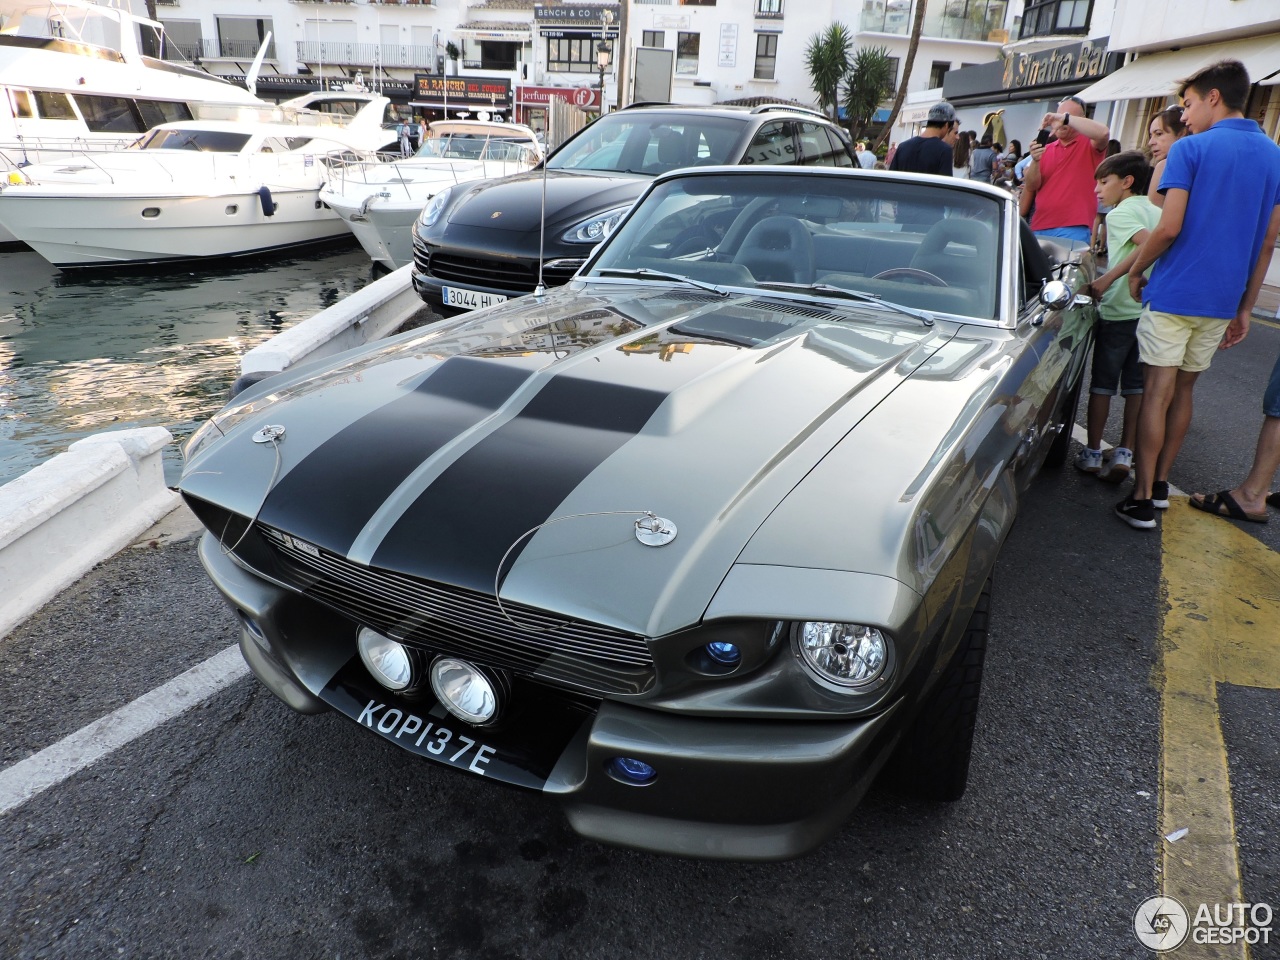 Ford Mustang Shelby G.T. 500E Eleanor Cabriolet